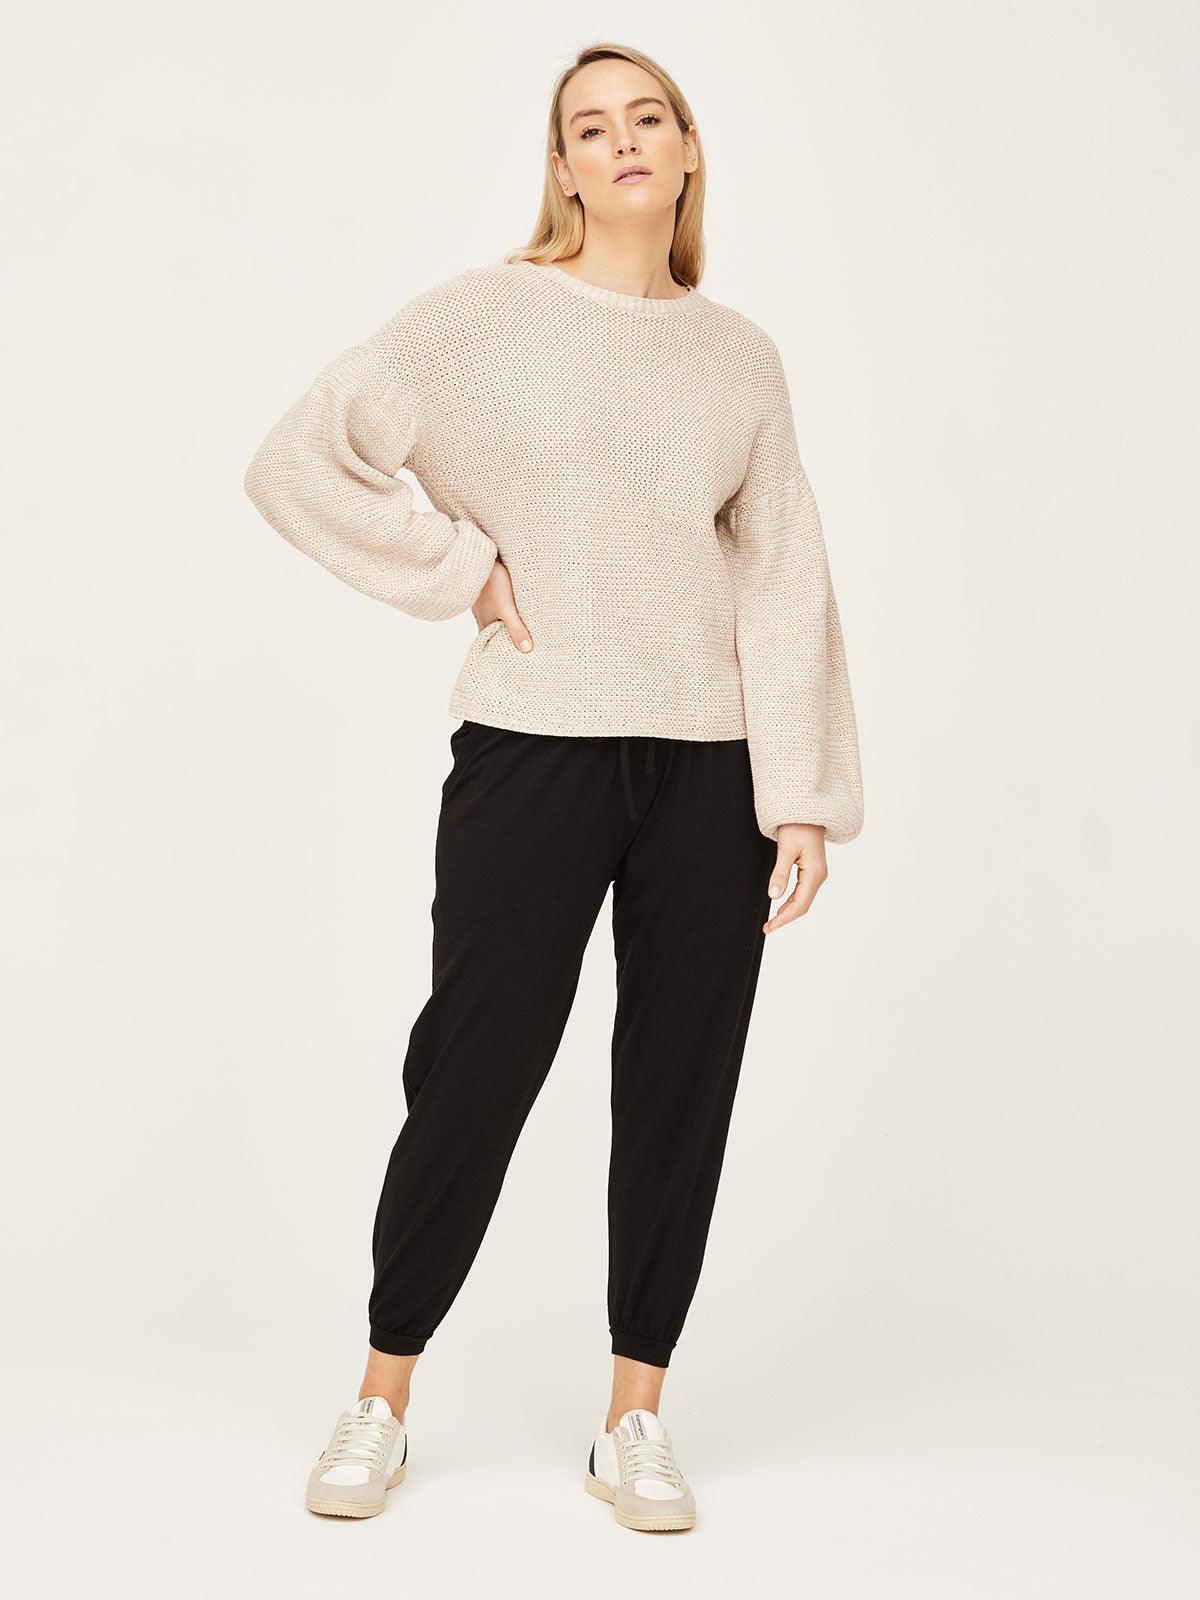 Chunky Organic Cotton Knit Jumper - Thought Clothing UK